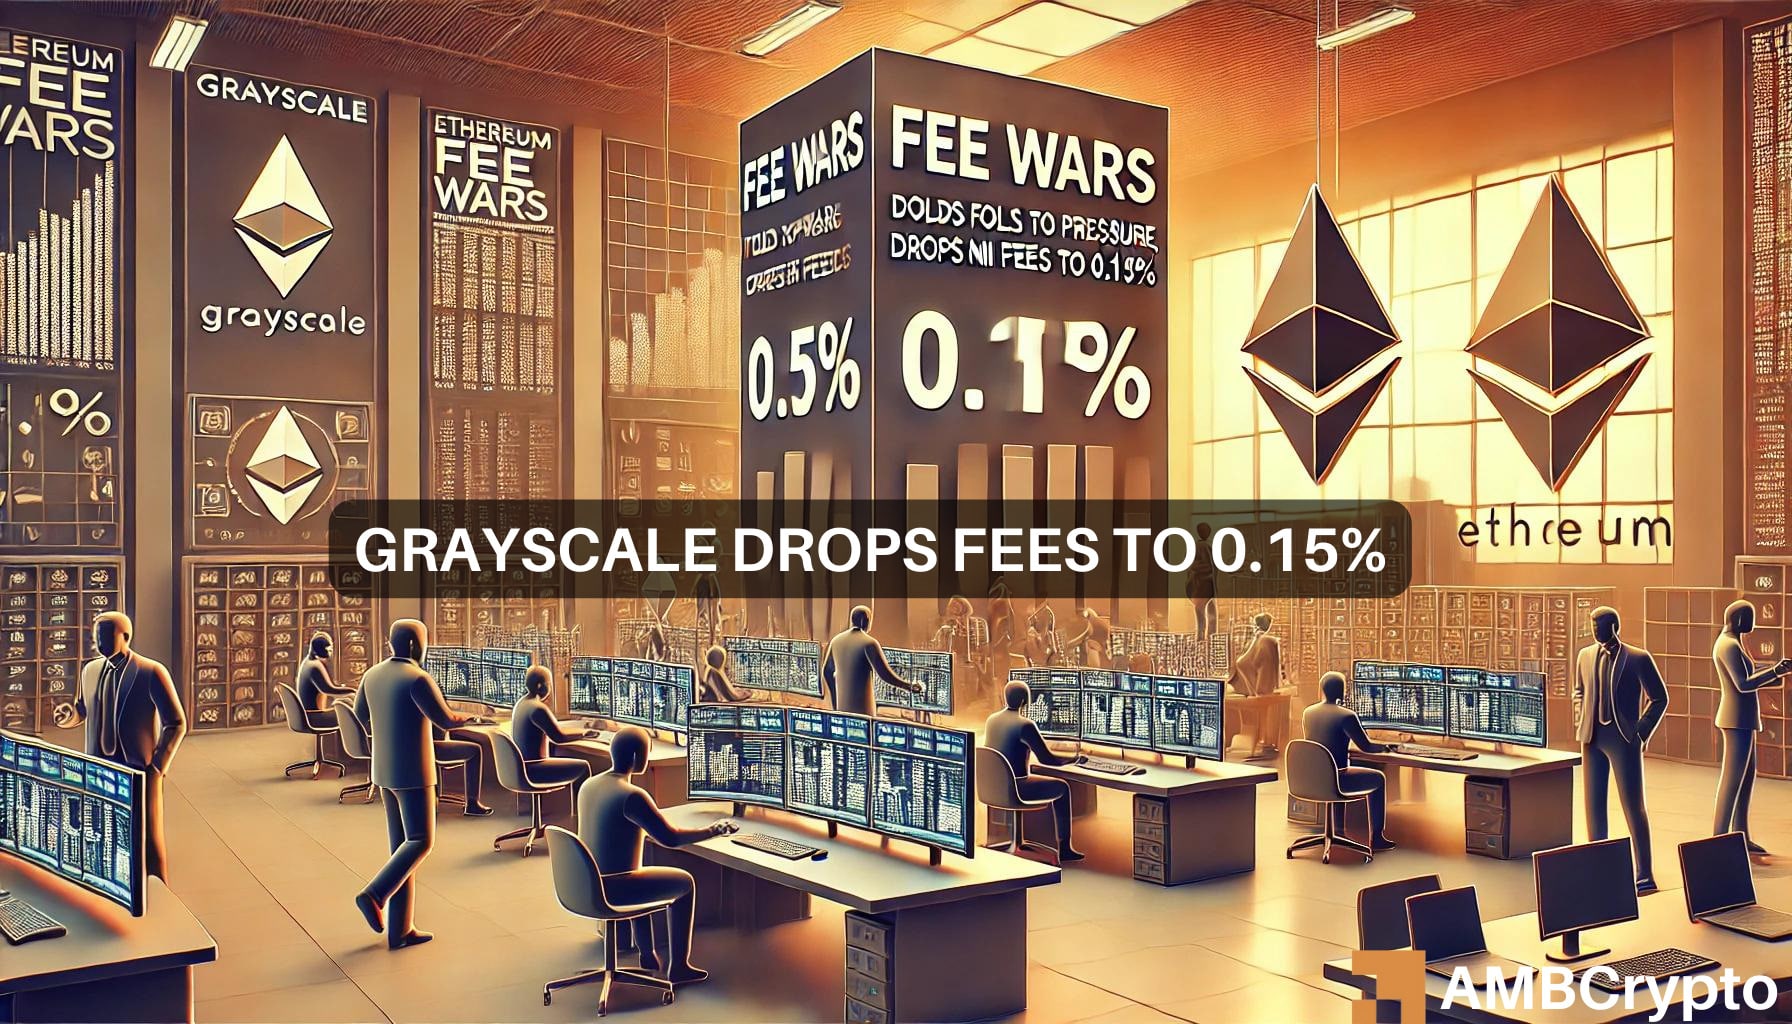 Ethereum ETF fee wars: Grayscale goes 'for the jugular,' drops Mini fees to 0.15%